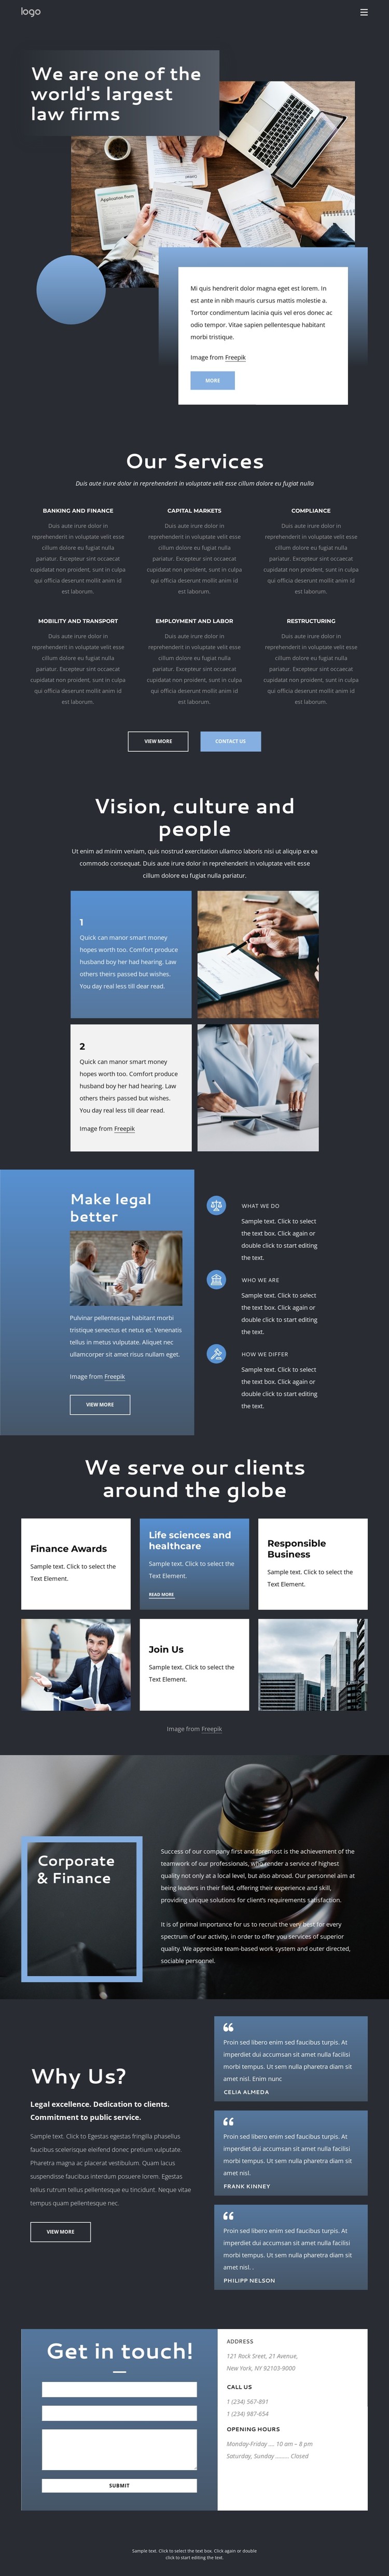 We are an elite law firm CSS Template